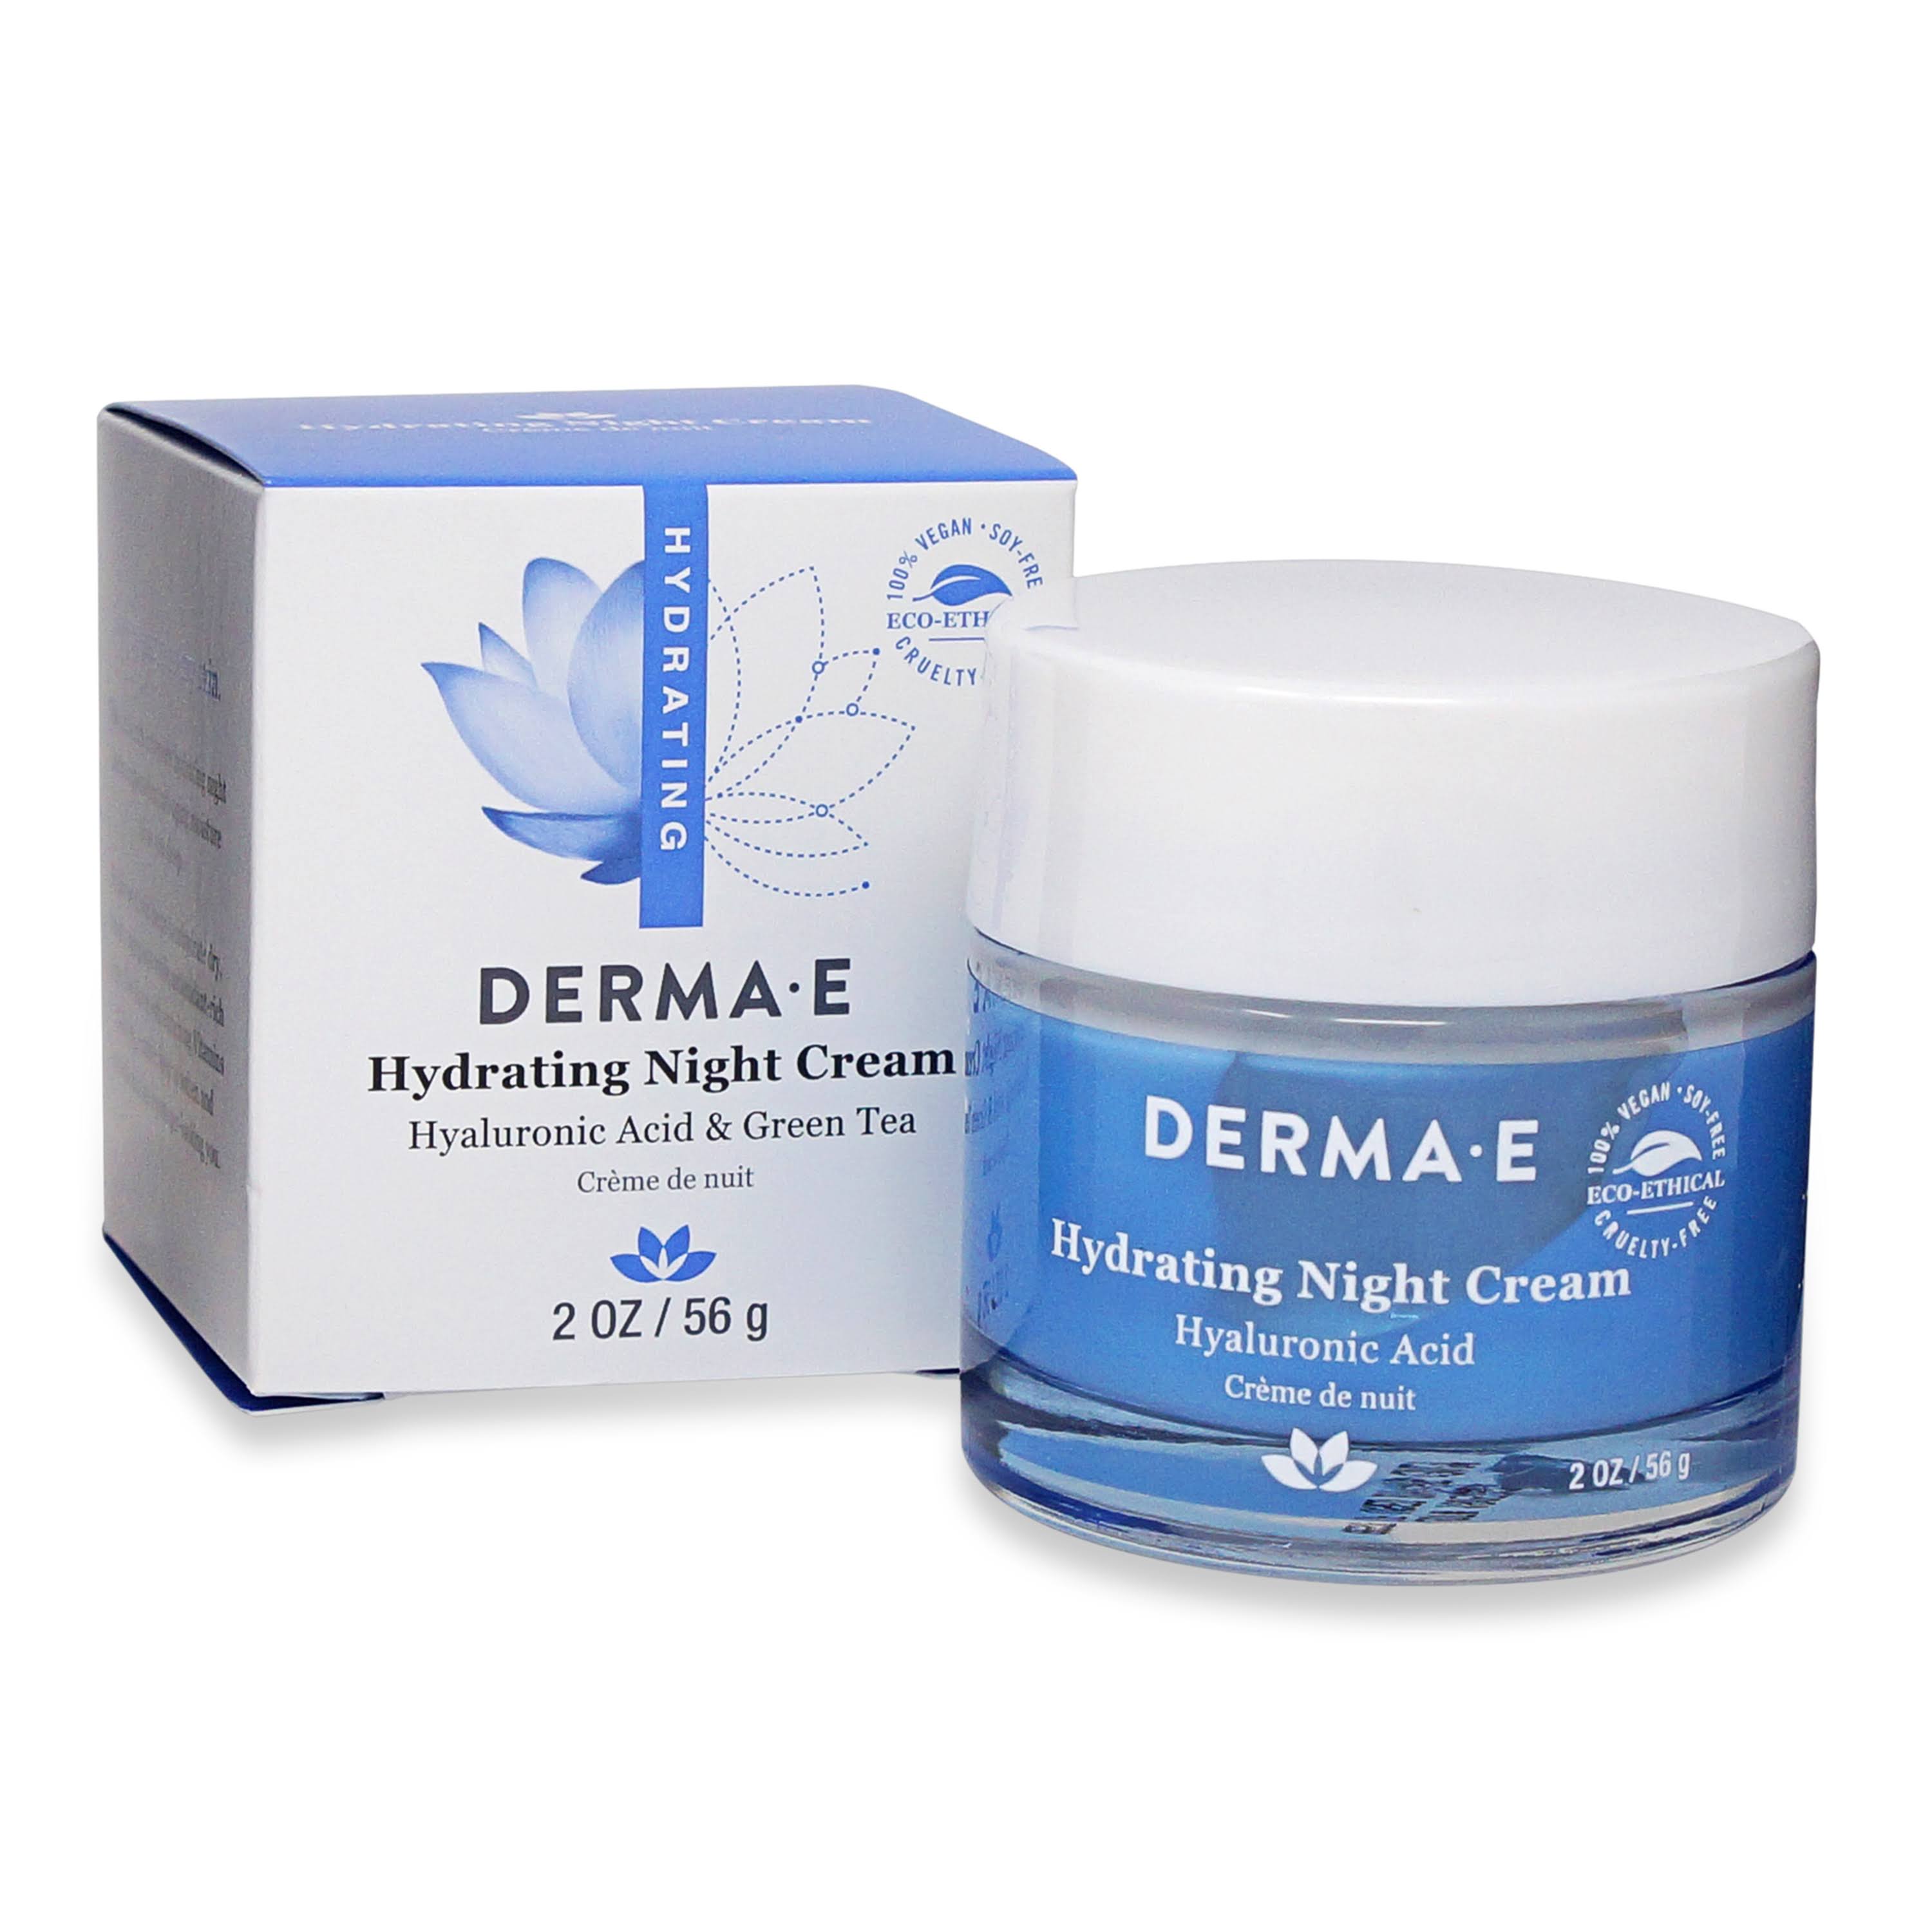 Derma E Hydrating Night Crème with Hyaluronic Acid - 2oz